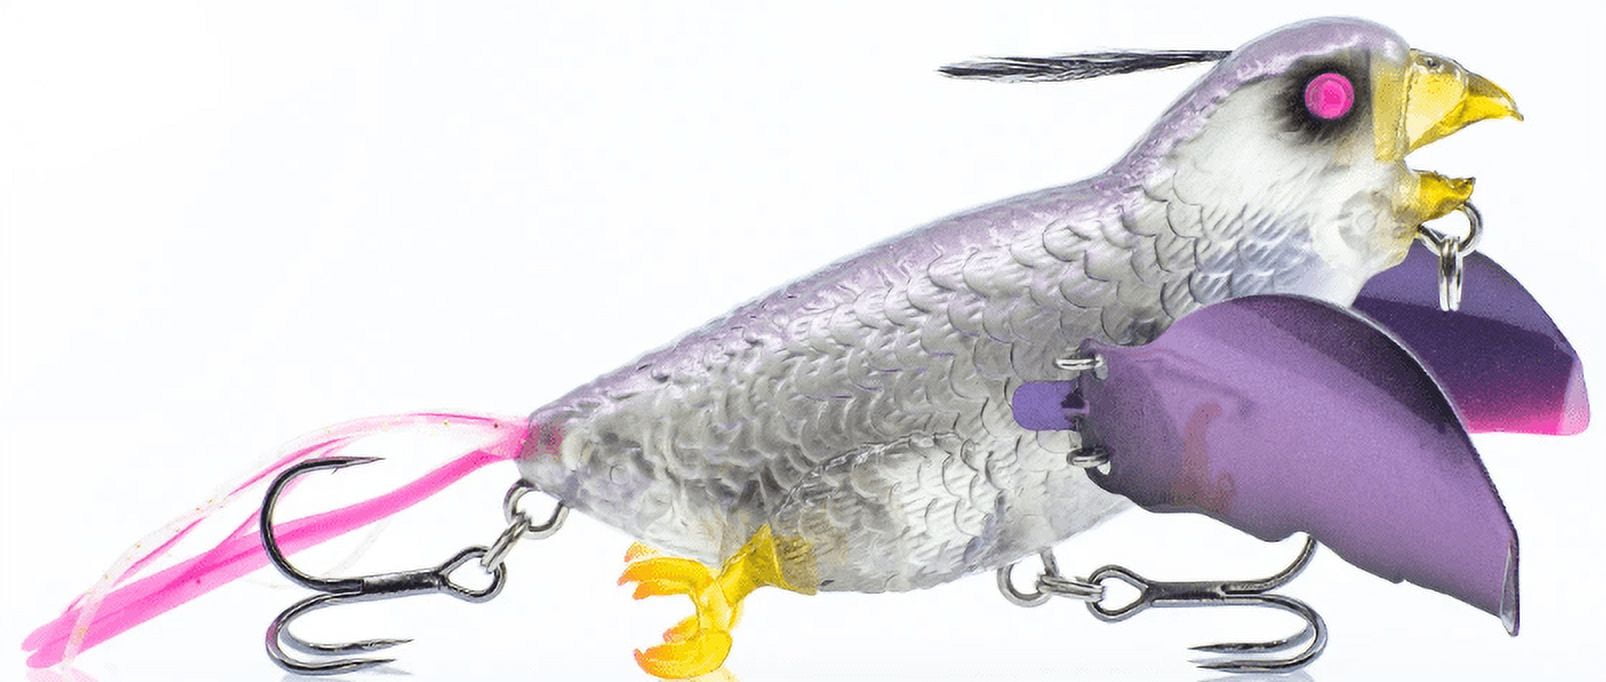 CRAZY TOPWATER LURE! Will it work?! Chasebaits Smuggler Budgie